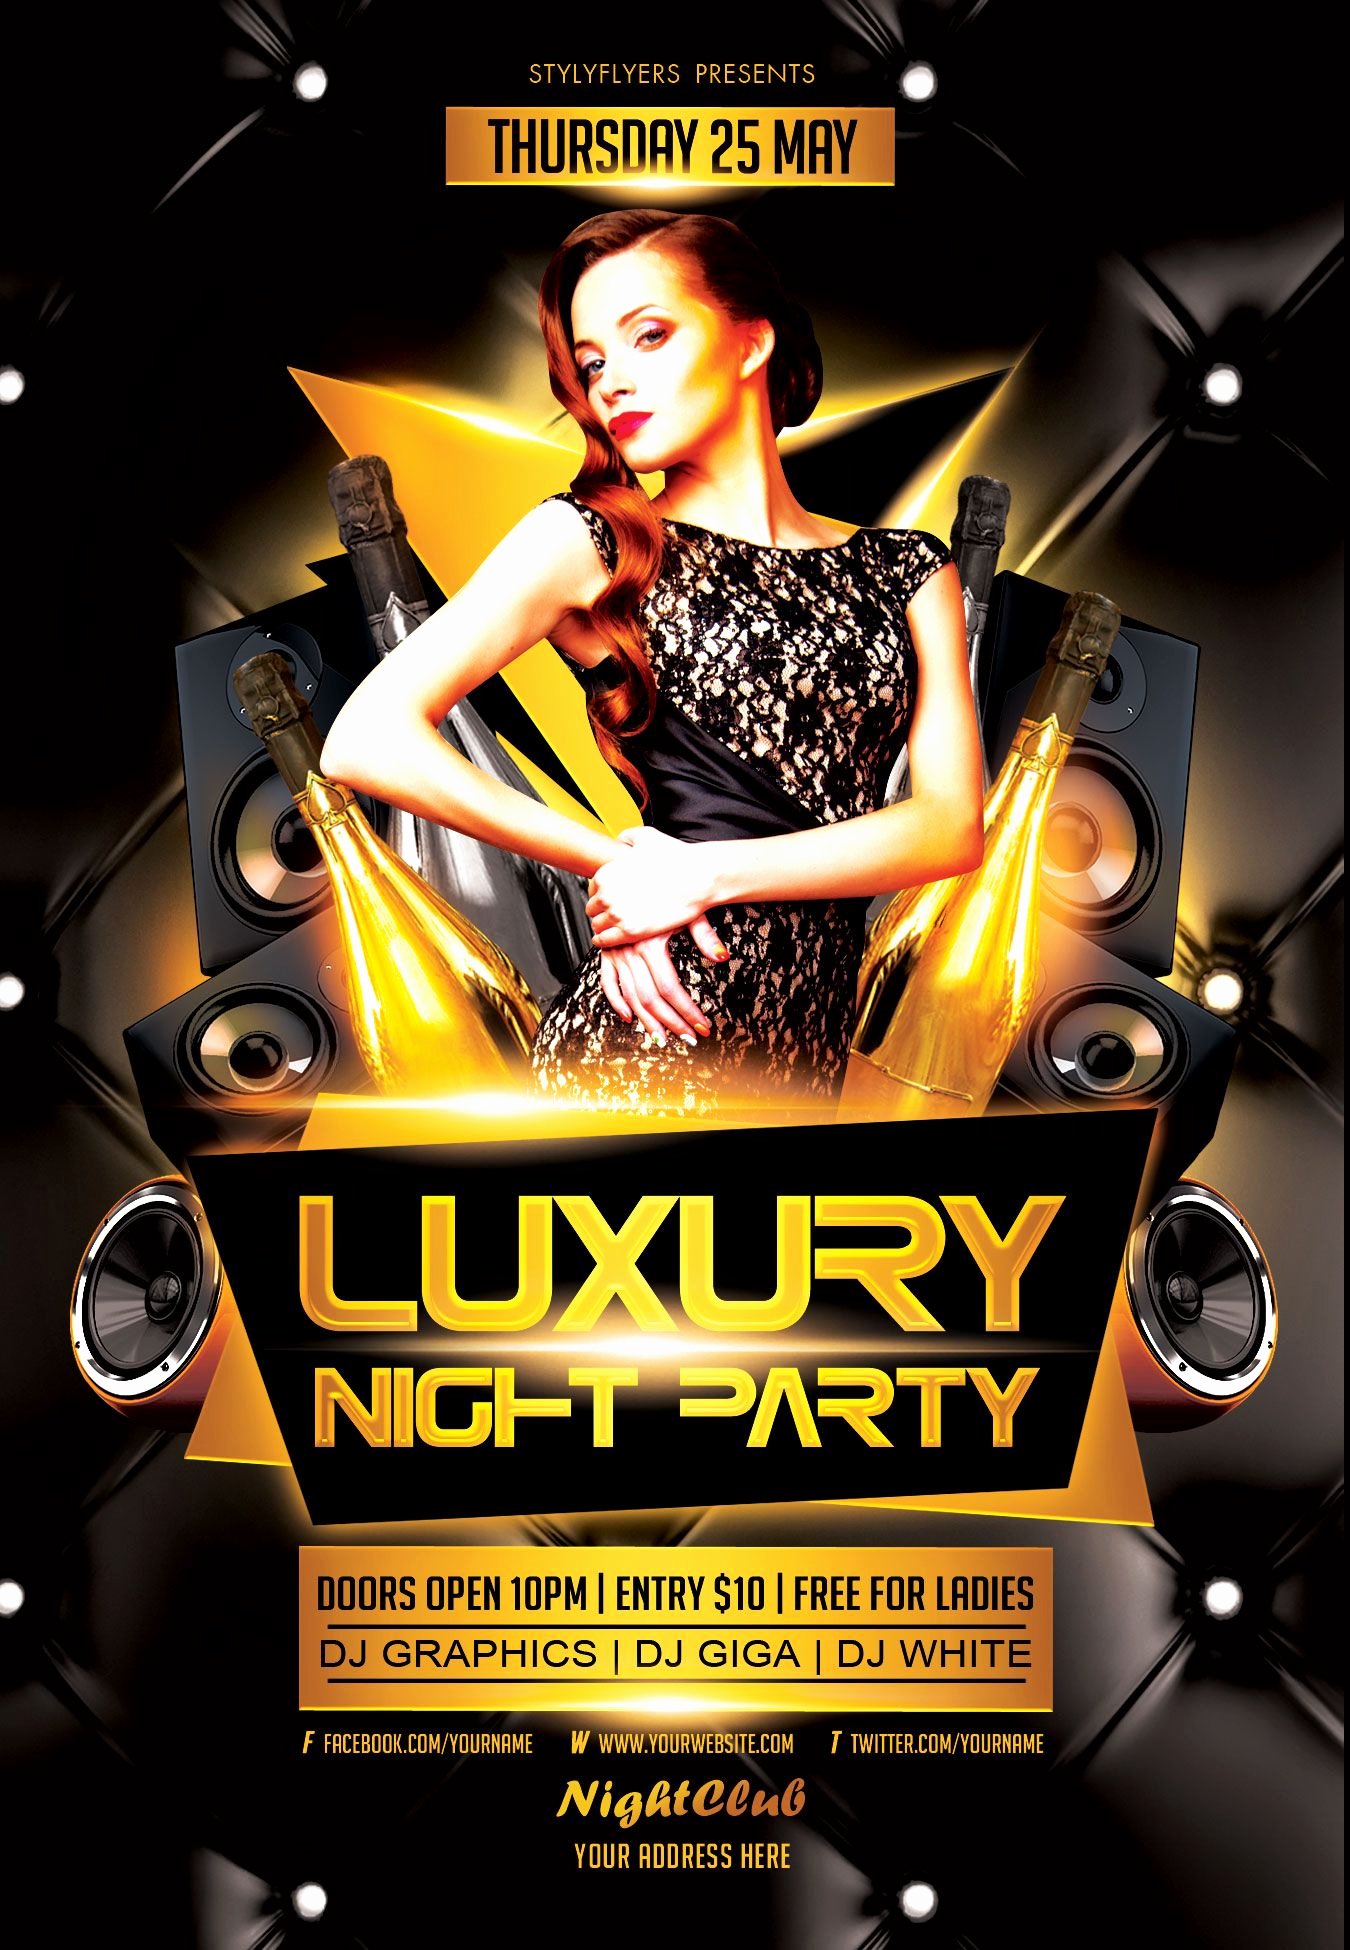 Free Club Flyer Templates New Free Luxury Night Party Flyer Psd Template by Styleflyer